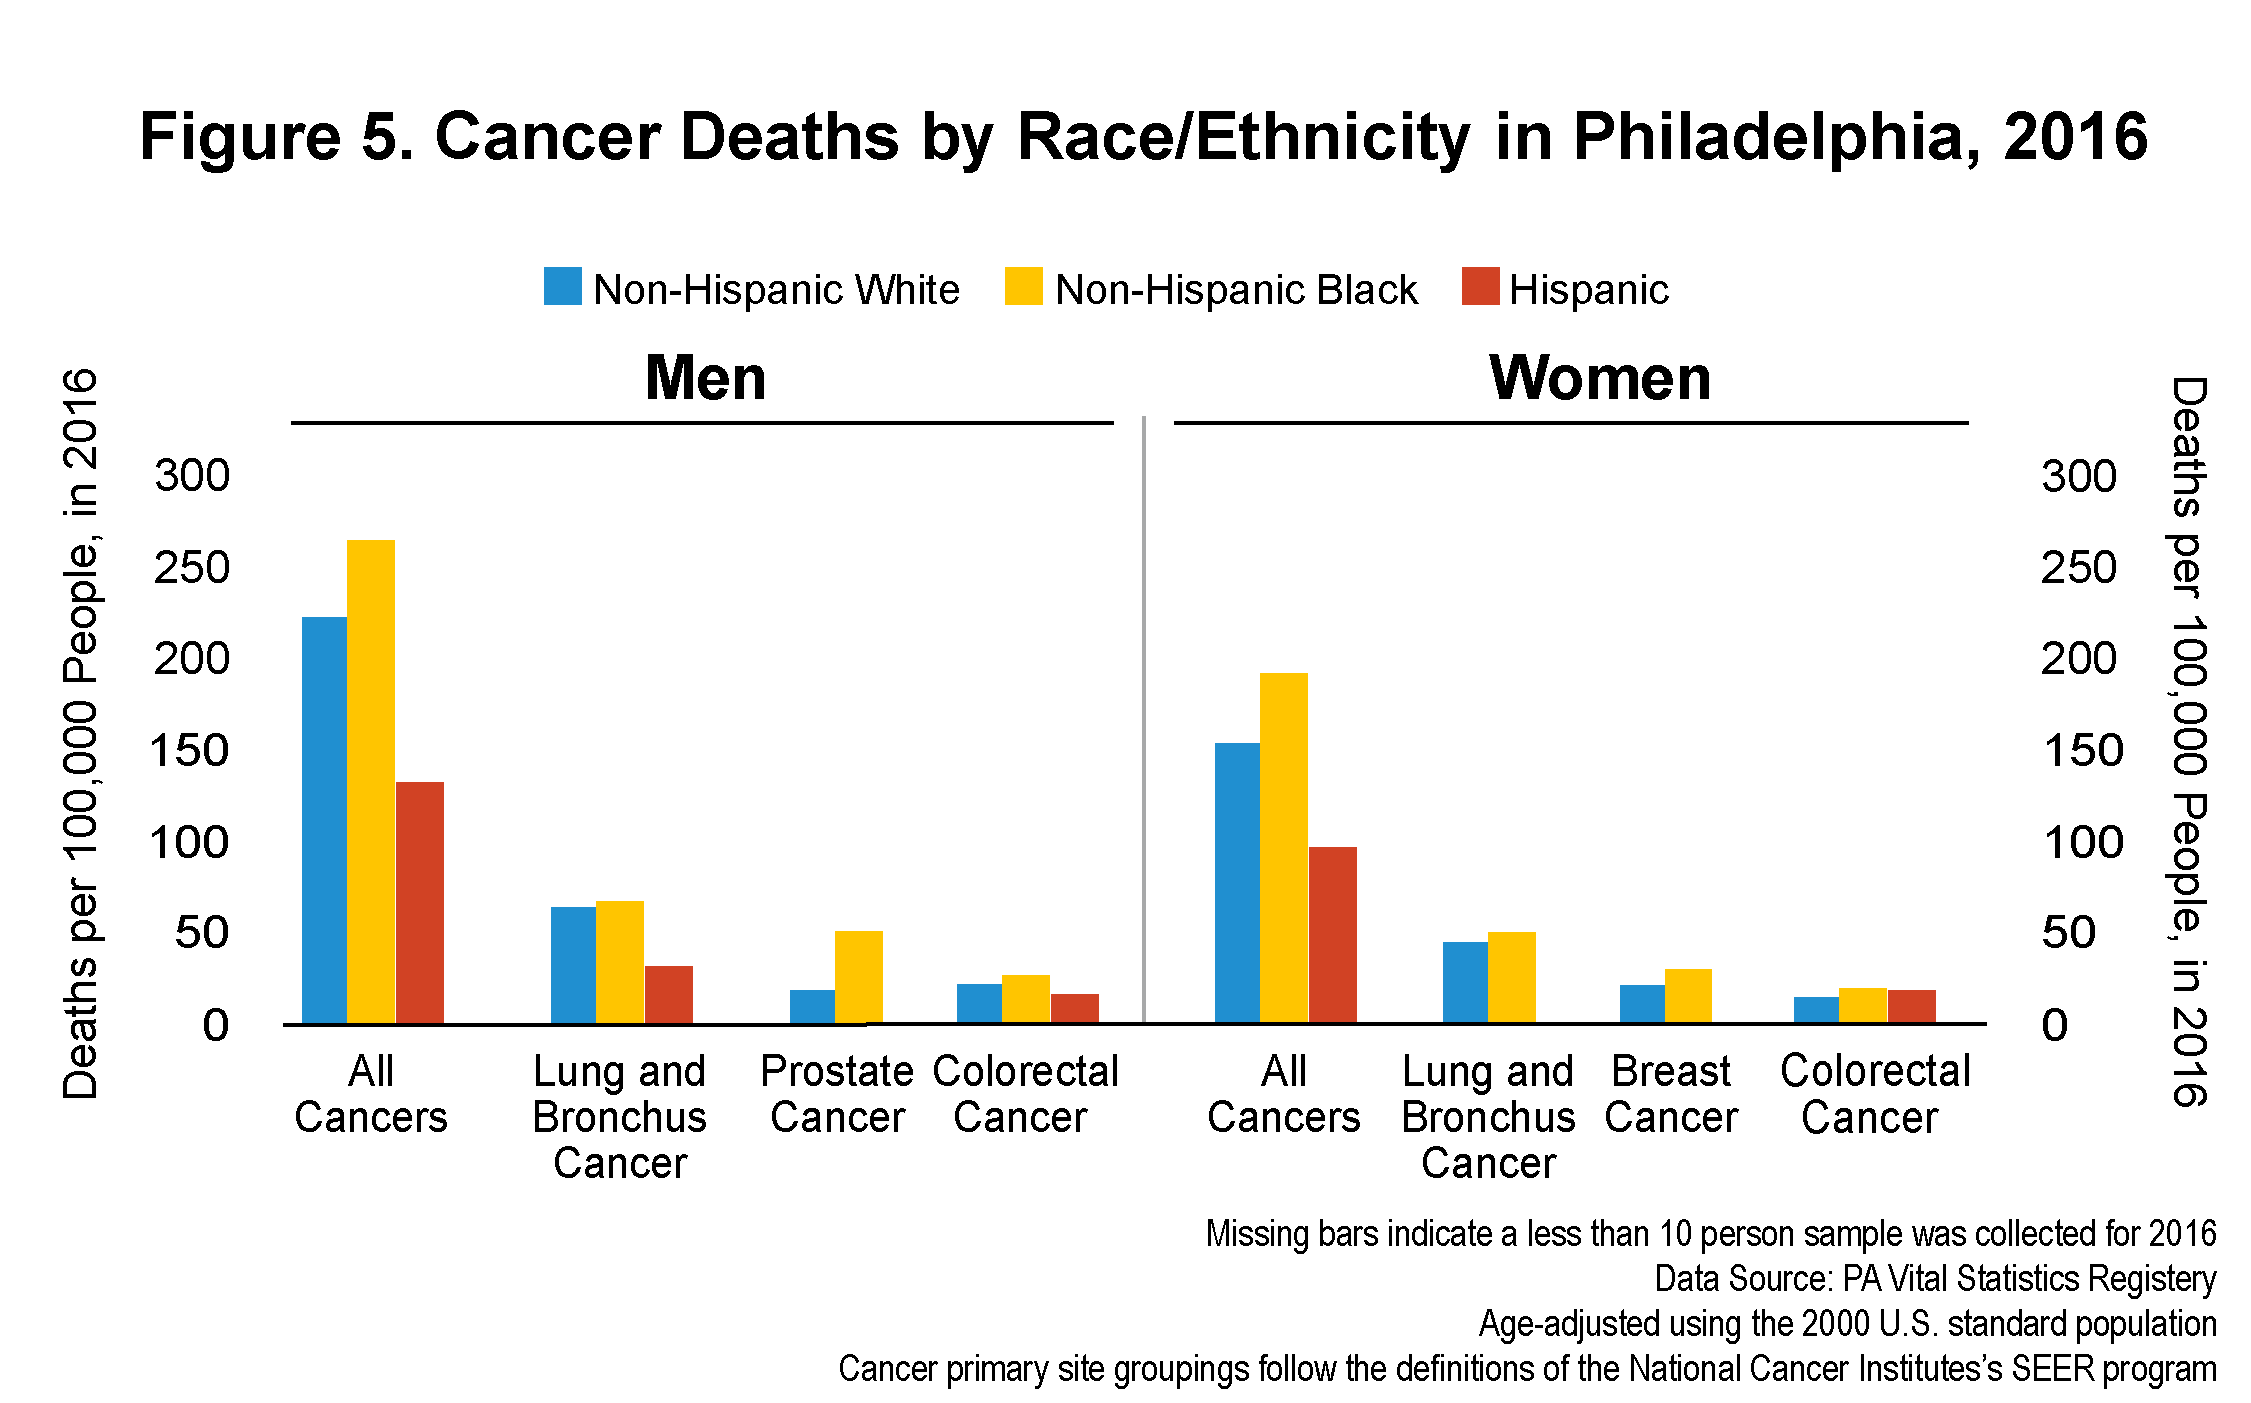 Figure 5. Cancer Deaths by Race/Ethnicity in Philadelphia, 2016